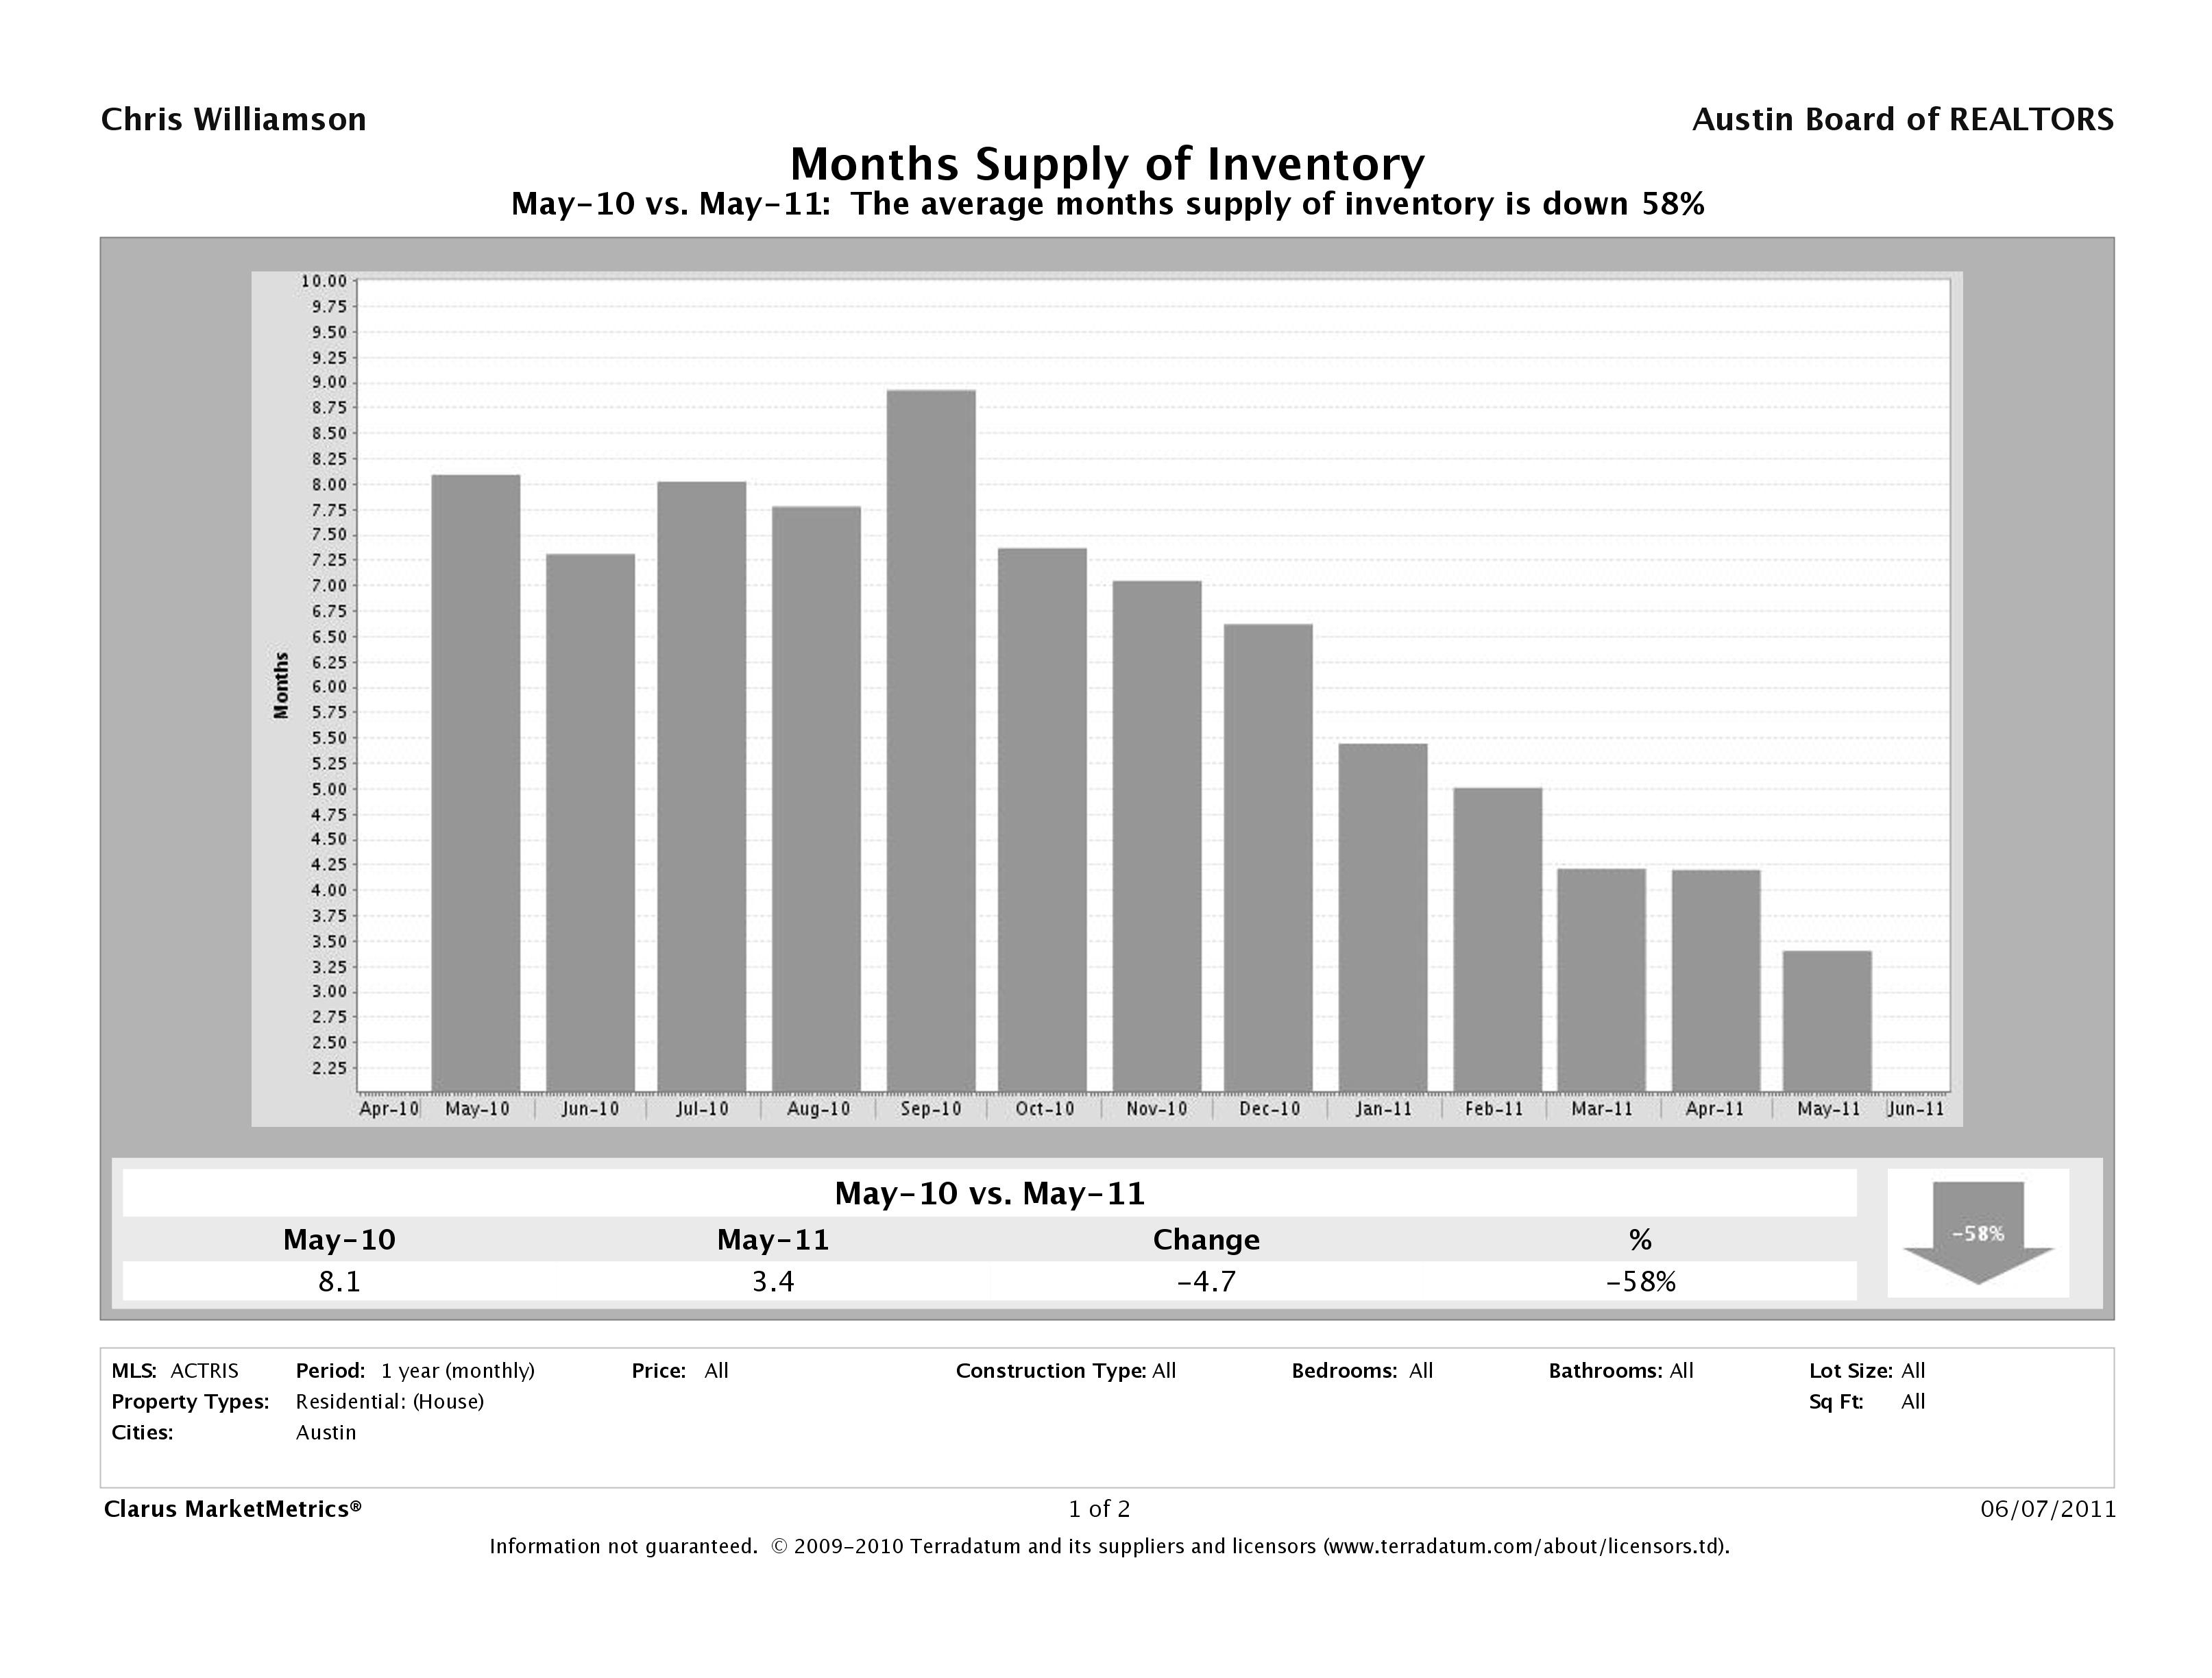 Austin single family home months inventory may 2011